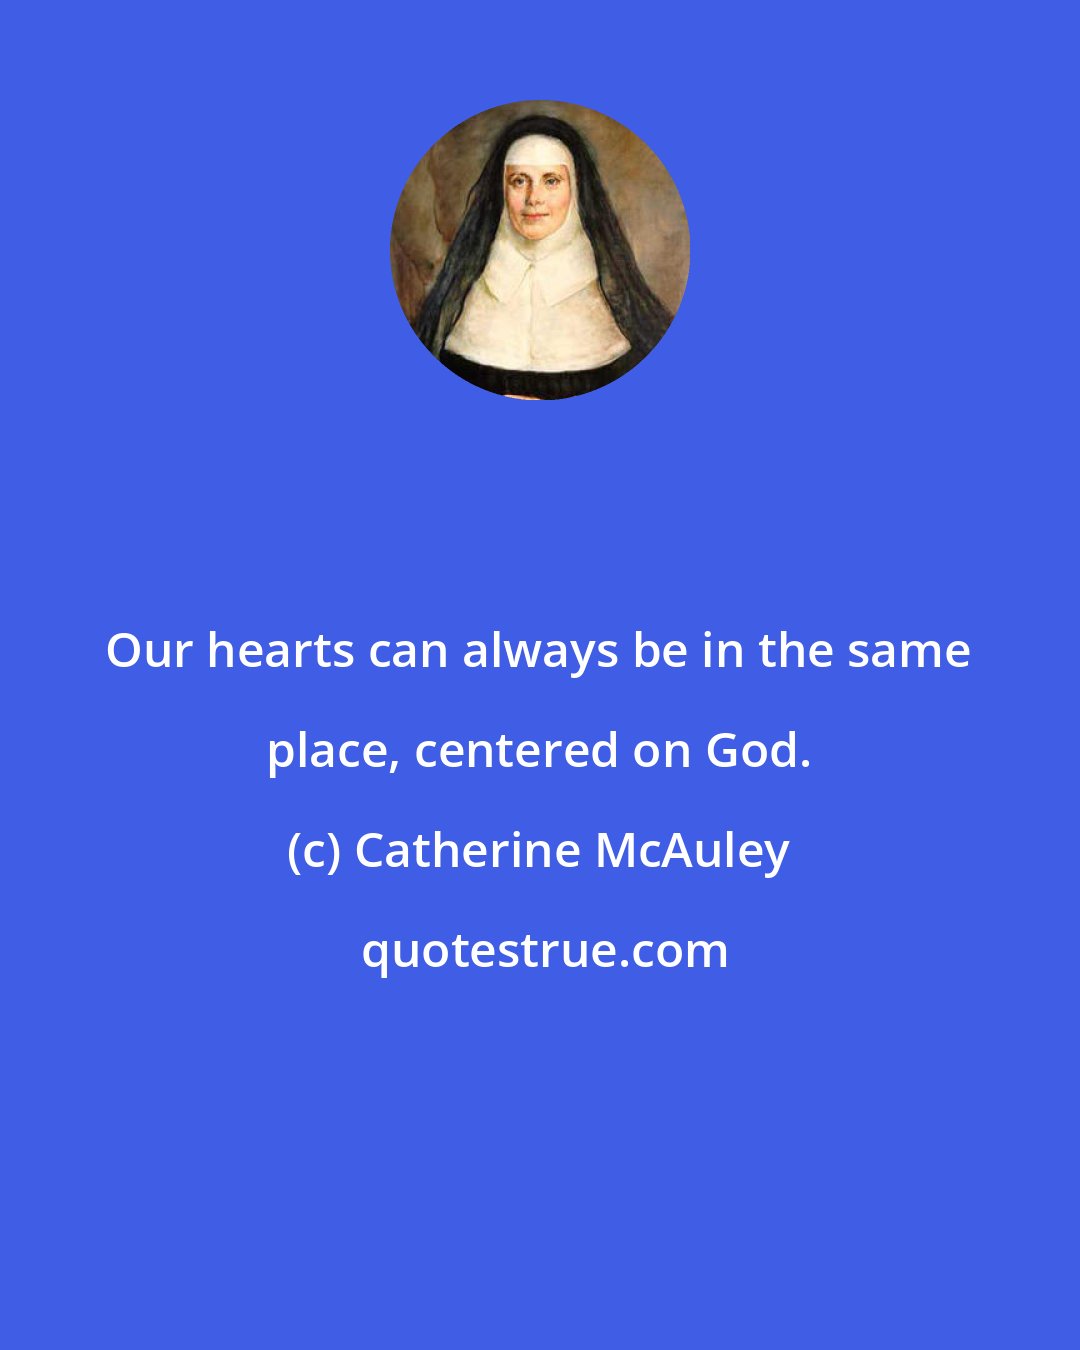 Catherine McAuley: Our hearts can always be in the same place, centered on God.